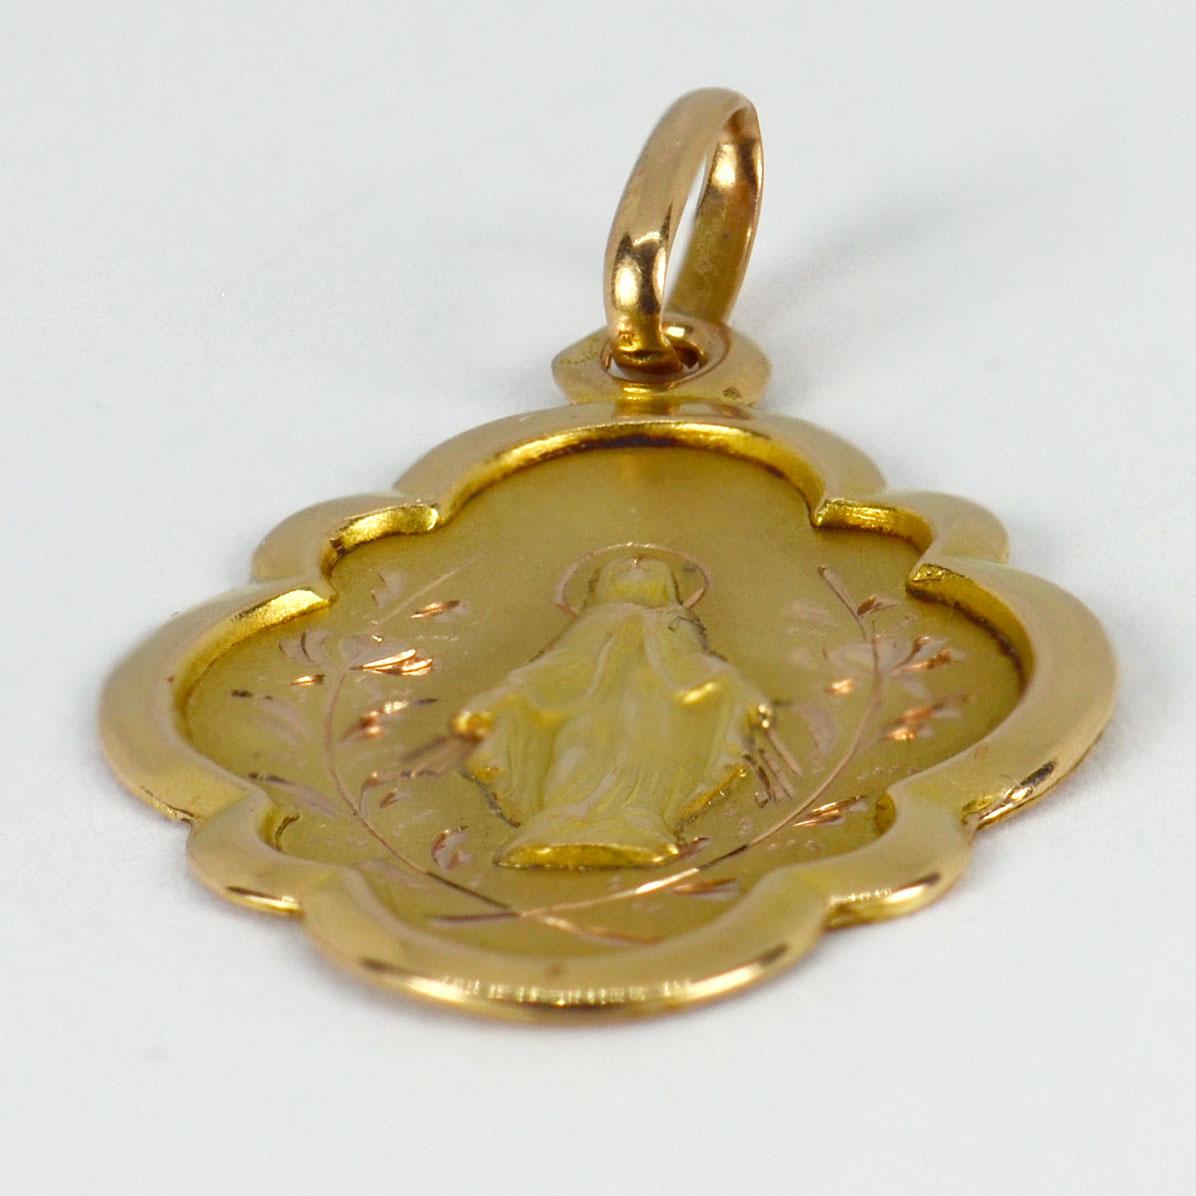 An 18 karat (18K) yellow gold pendant designed as a medal depicting the Virgin Mary with a scalloped surround. Engraved to the reverse ‘Souvenir de ma premiere Communion (abbreviated), Montmorency de 7 Juin 1923’ with the monogram DG. Stamped with